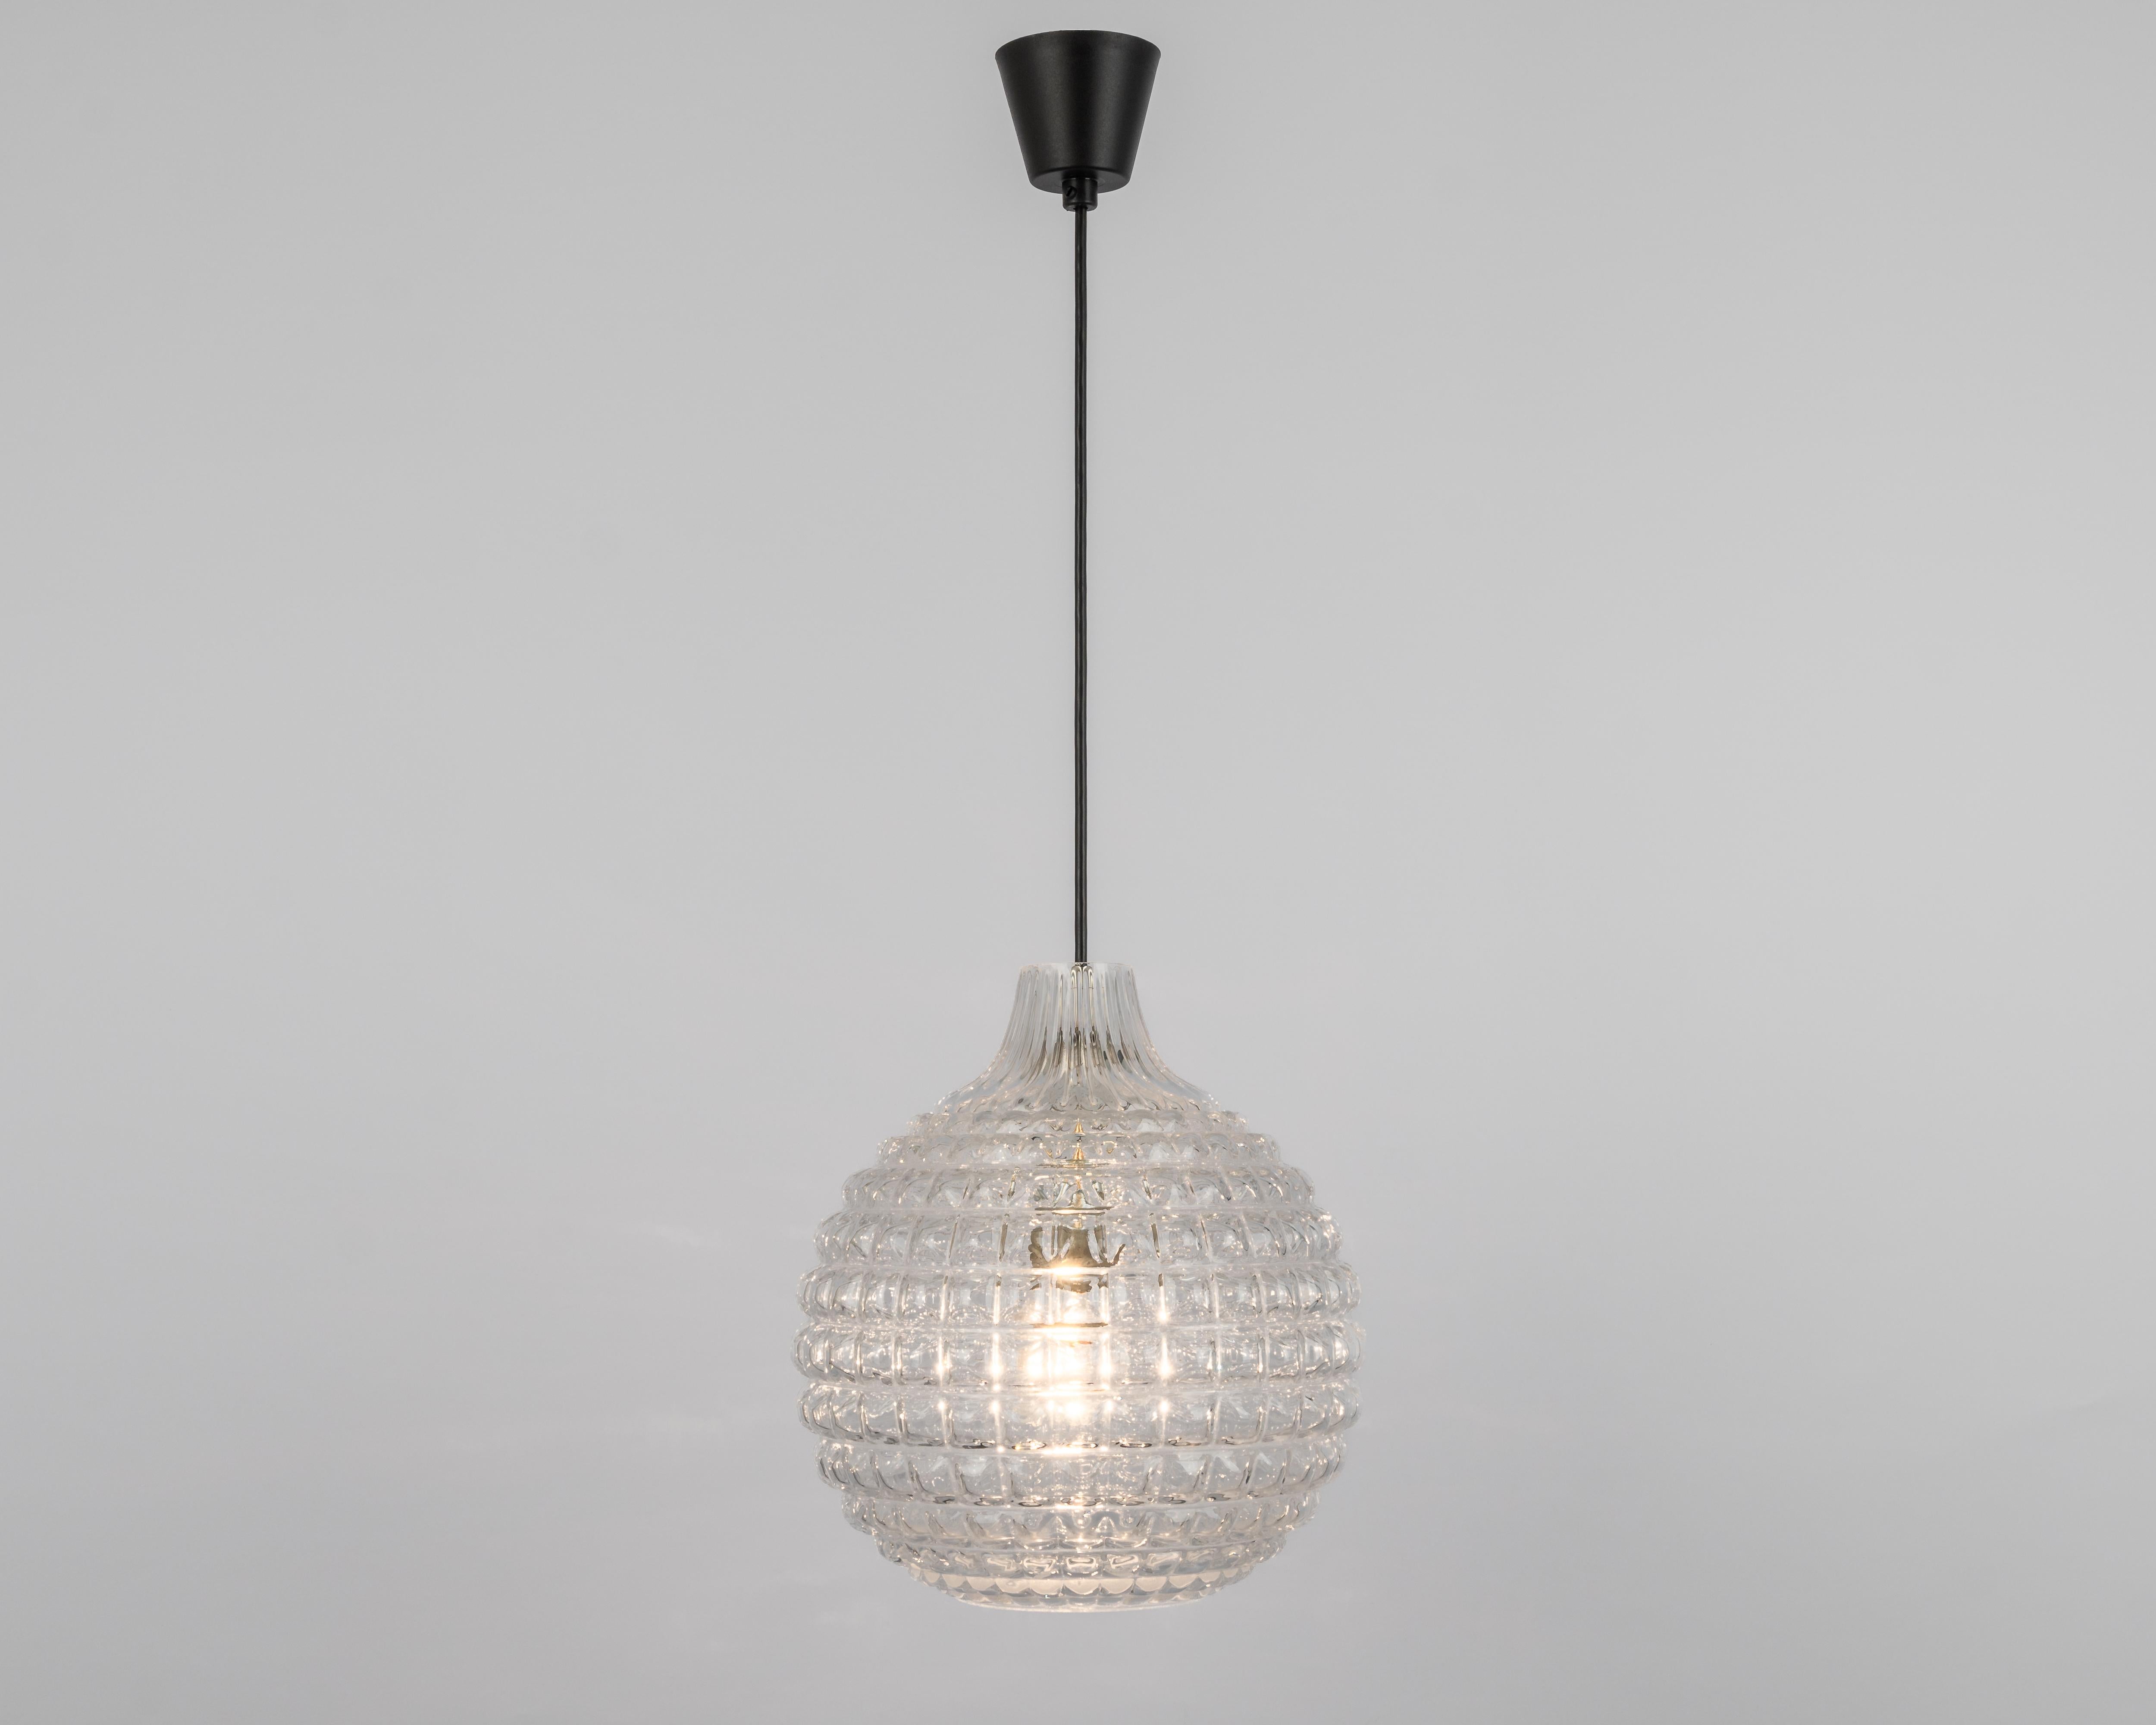 1 of 2 Stunning Crystal Glass Pendant Light, Peill & Putzler, Germany, 1970s For Sale 7